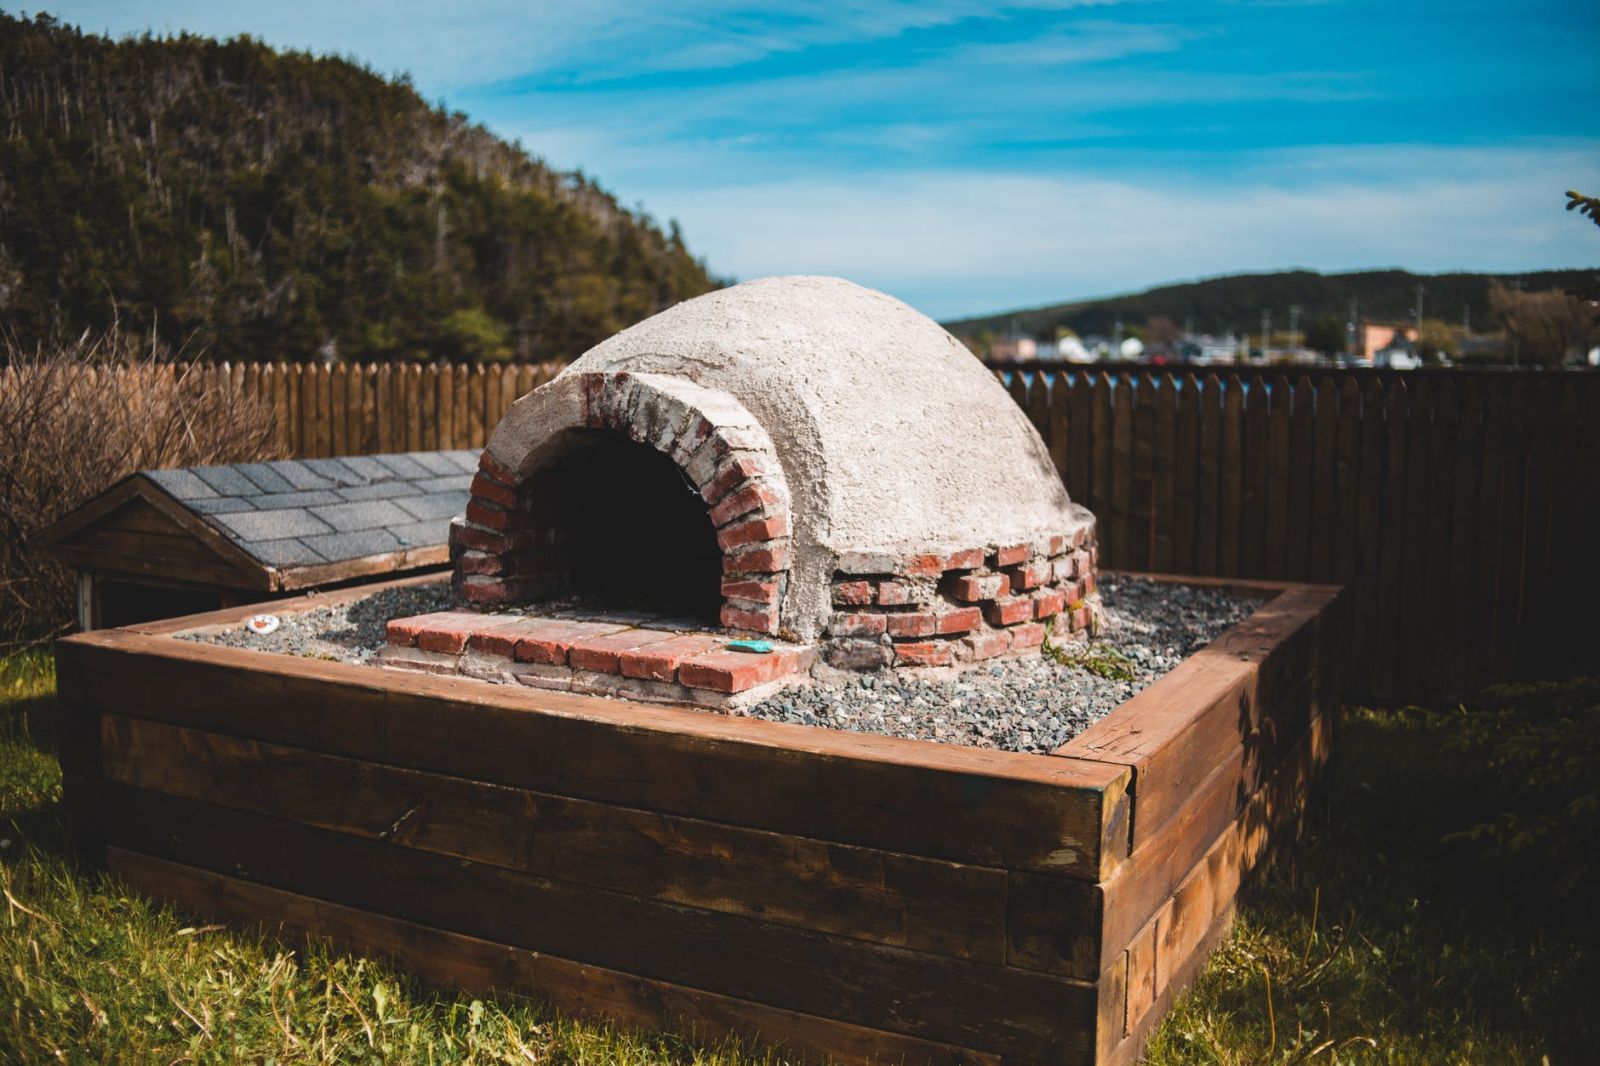 Brick pizza oven (Photo by Erik Mclean from Pexels)